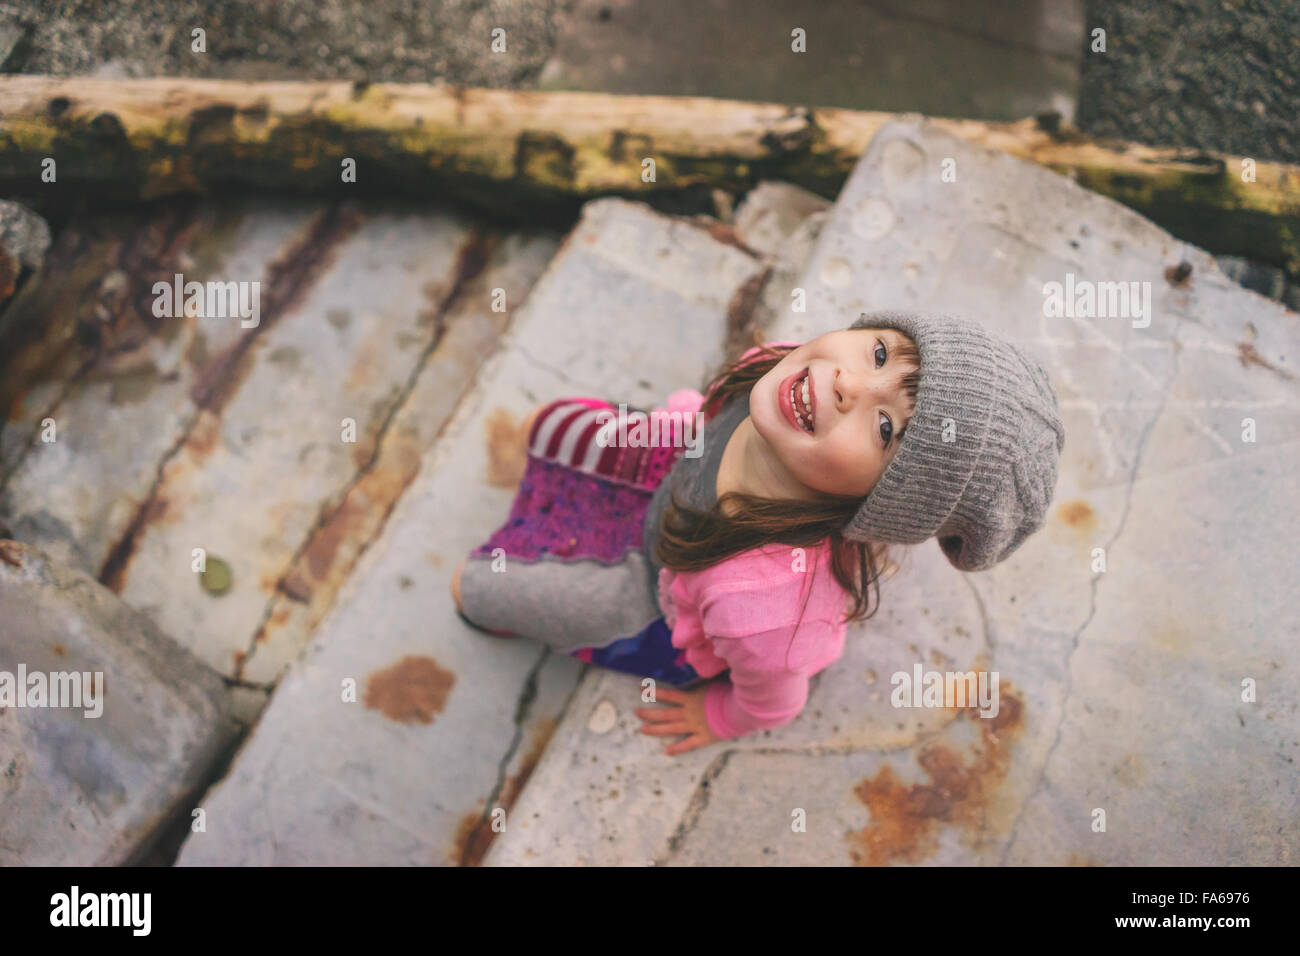 Elevated view of girl sitting on step wearing hat Stock Photo